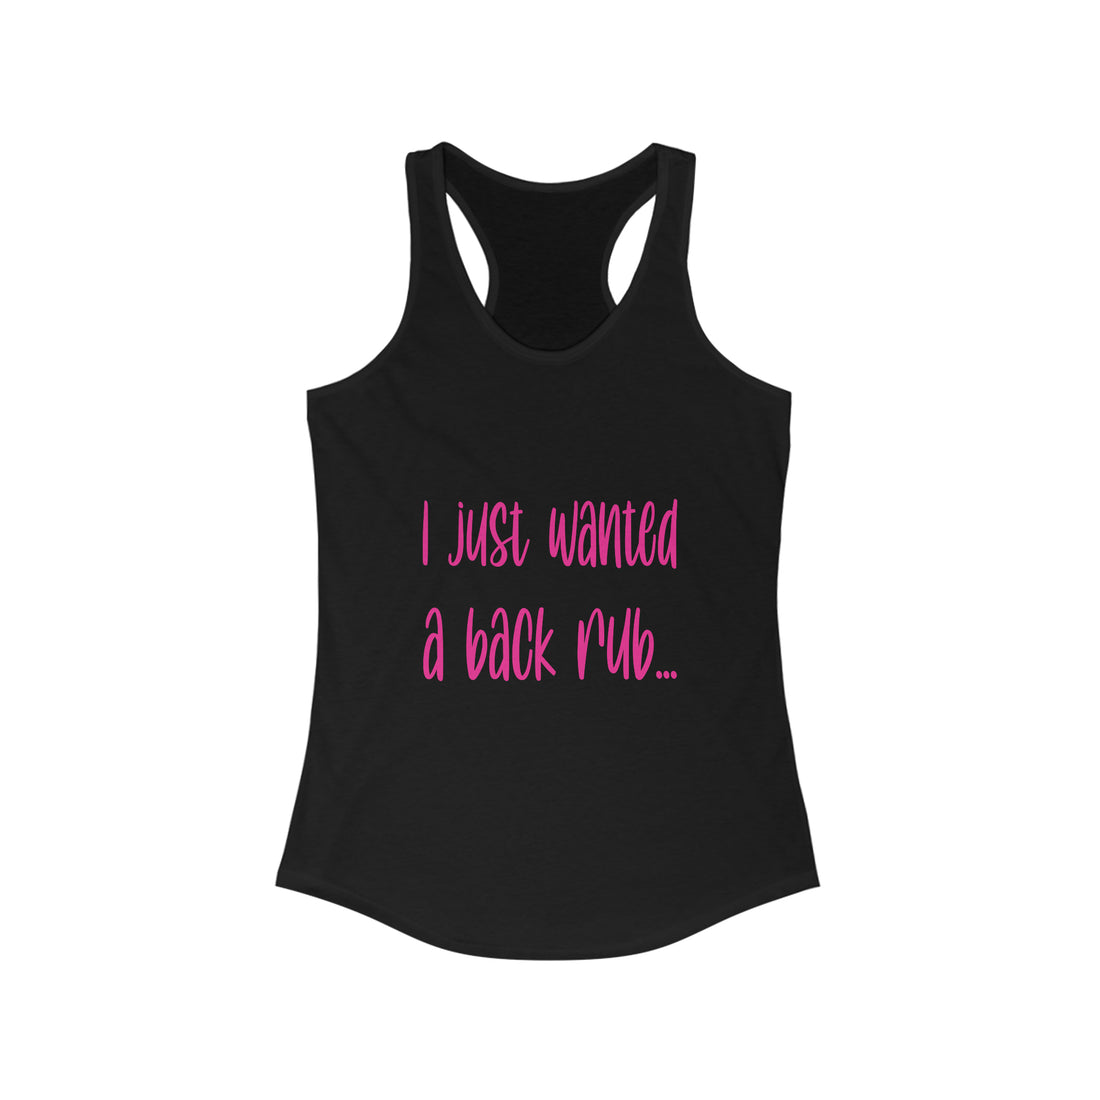 I Just Wanted A Back Rub - Racerback Tank Top